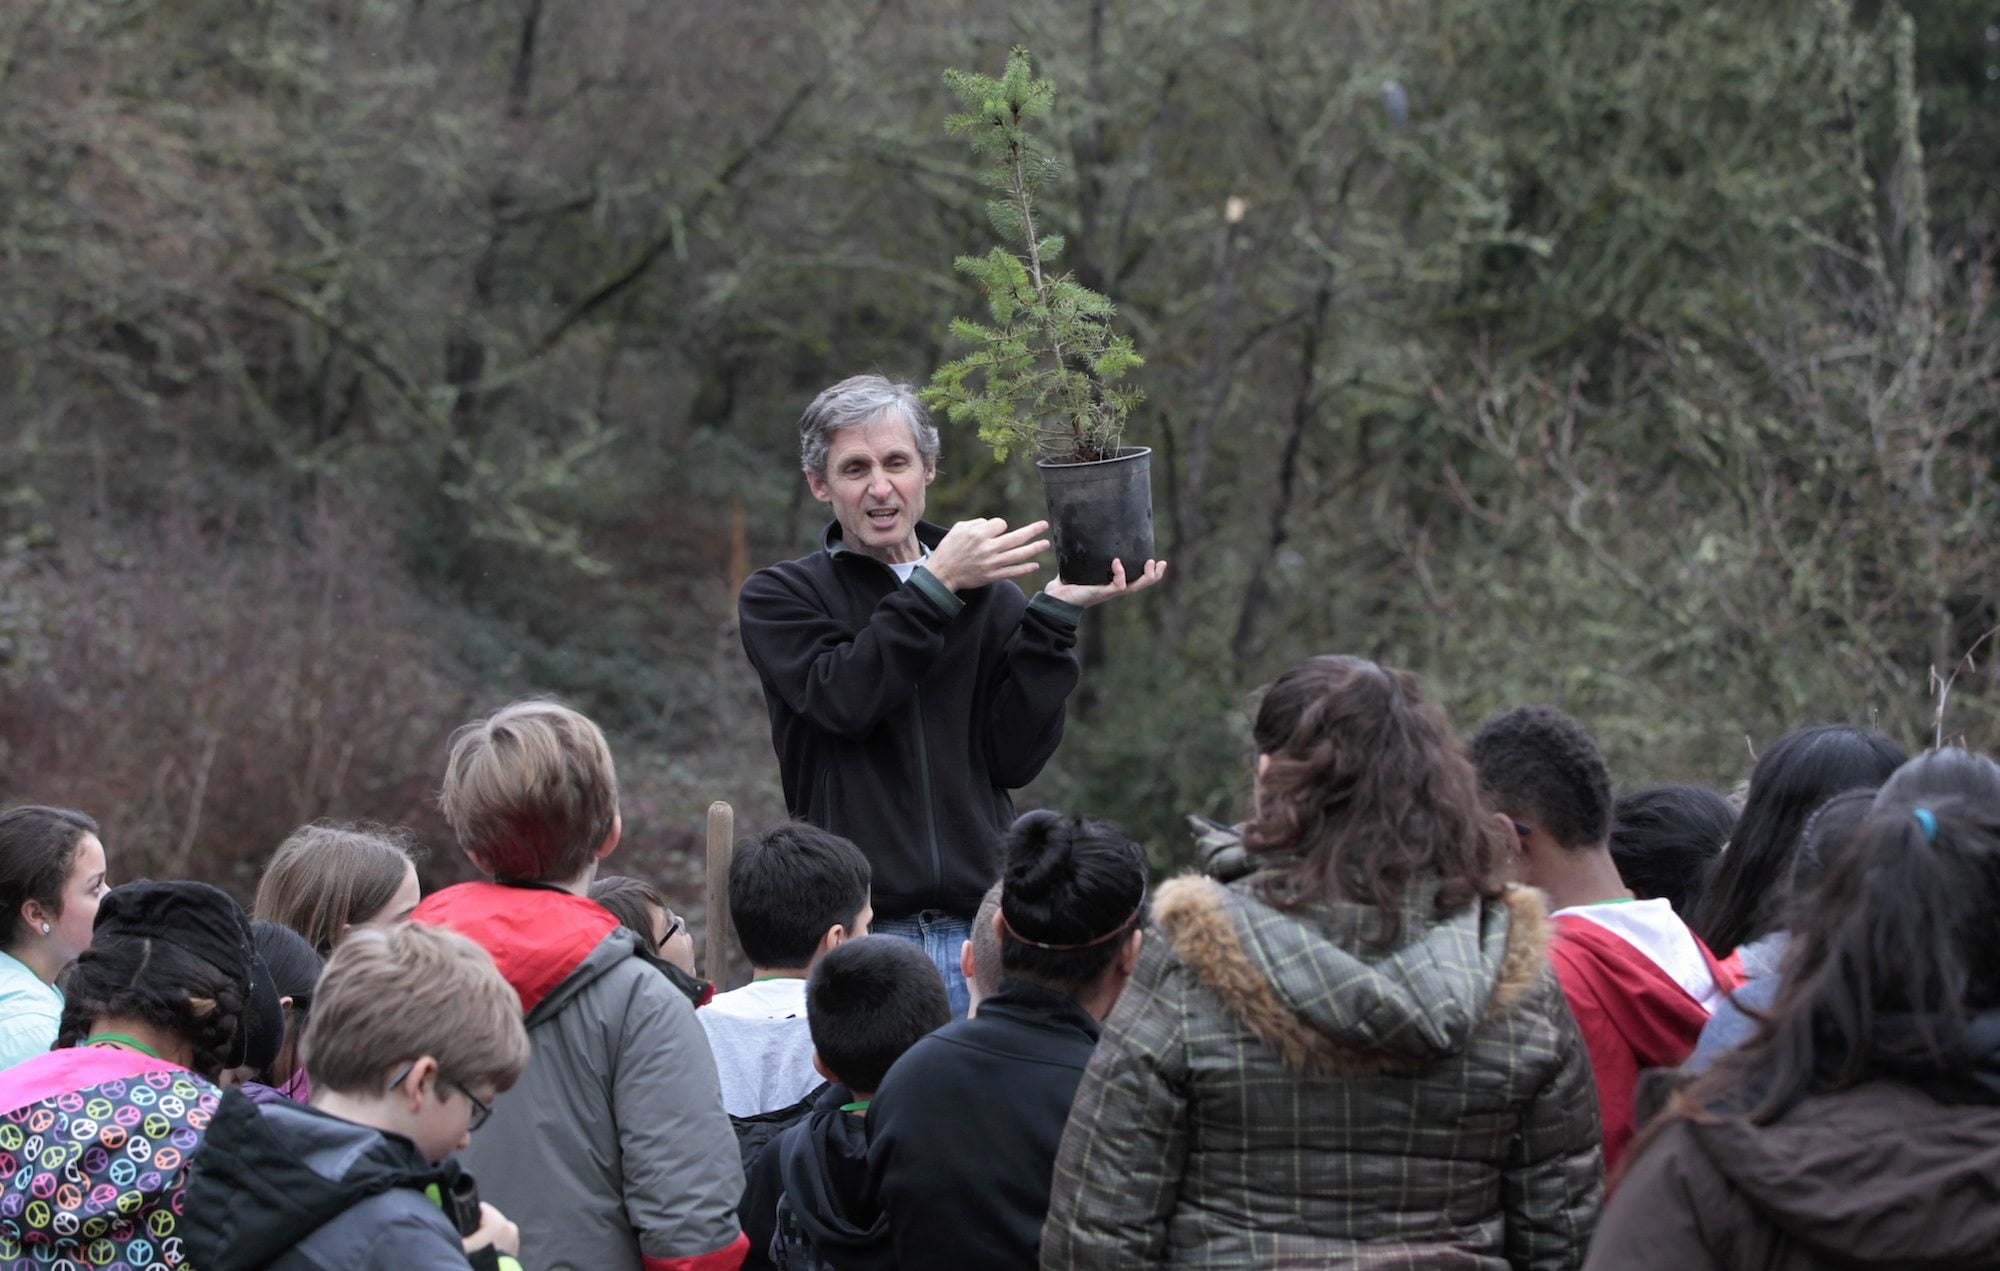 Michael Foster, a volunteer who started Plant for the Planet in Seattle, explains how to plant a Douglas fir seedling at Columbia Springs on Saturday. Sponsored by the United Nations, the event trains children and teens to become Ambassadors for Climate Justice.